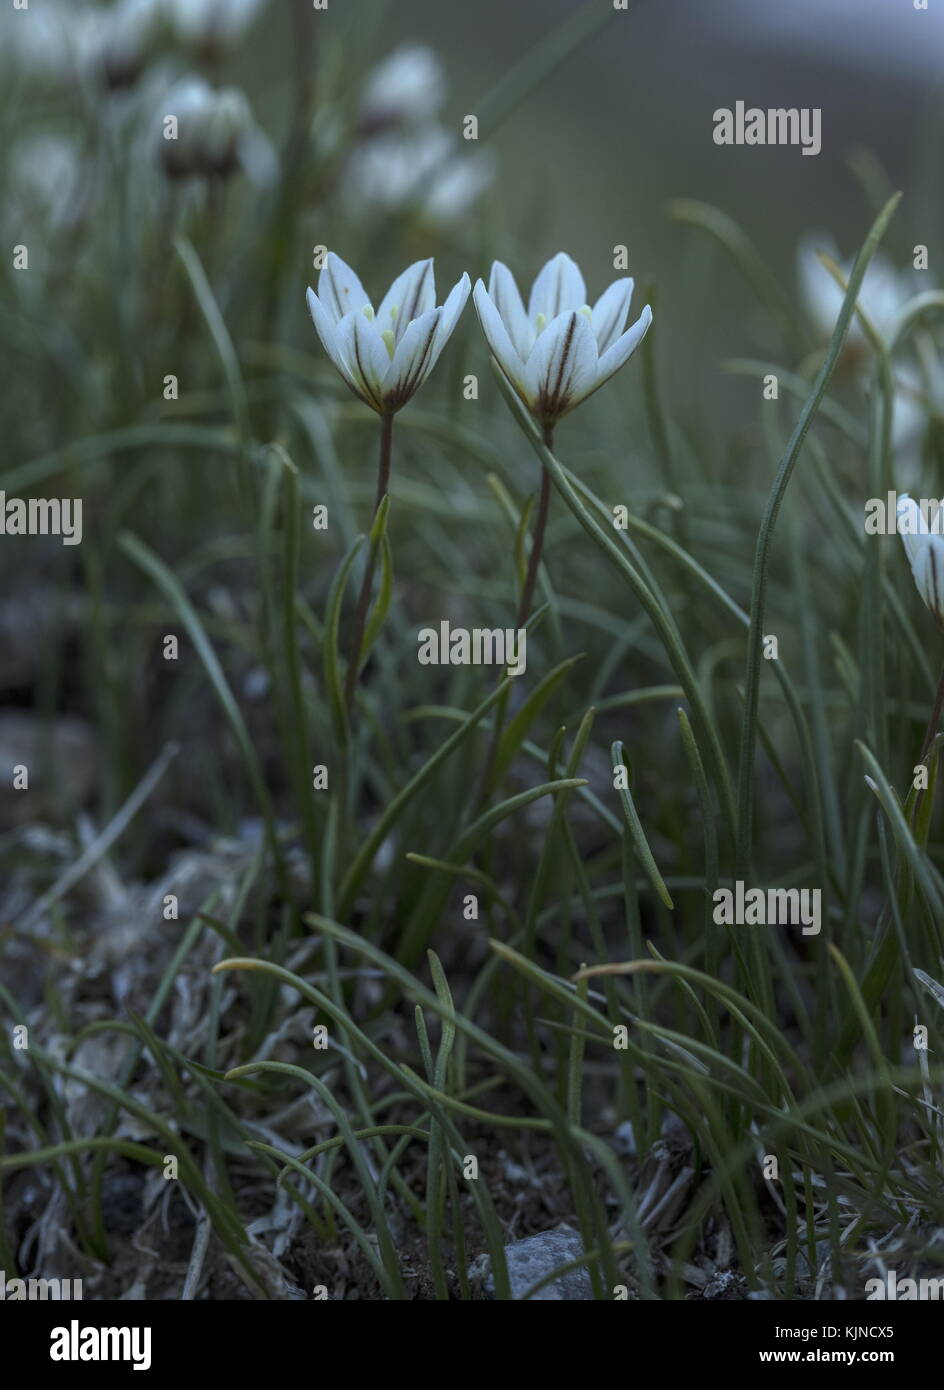 Snowdon lily, Gagea serotina,  in flower in the high Swiss Alps. Stock Photo